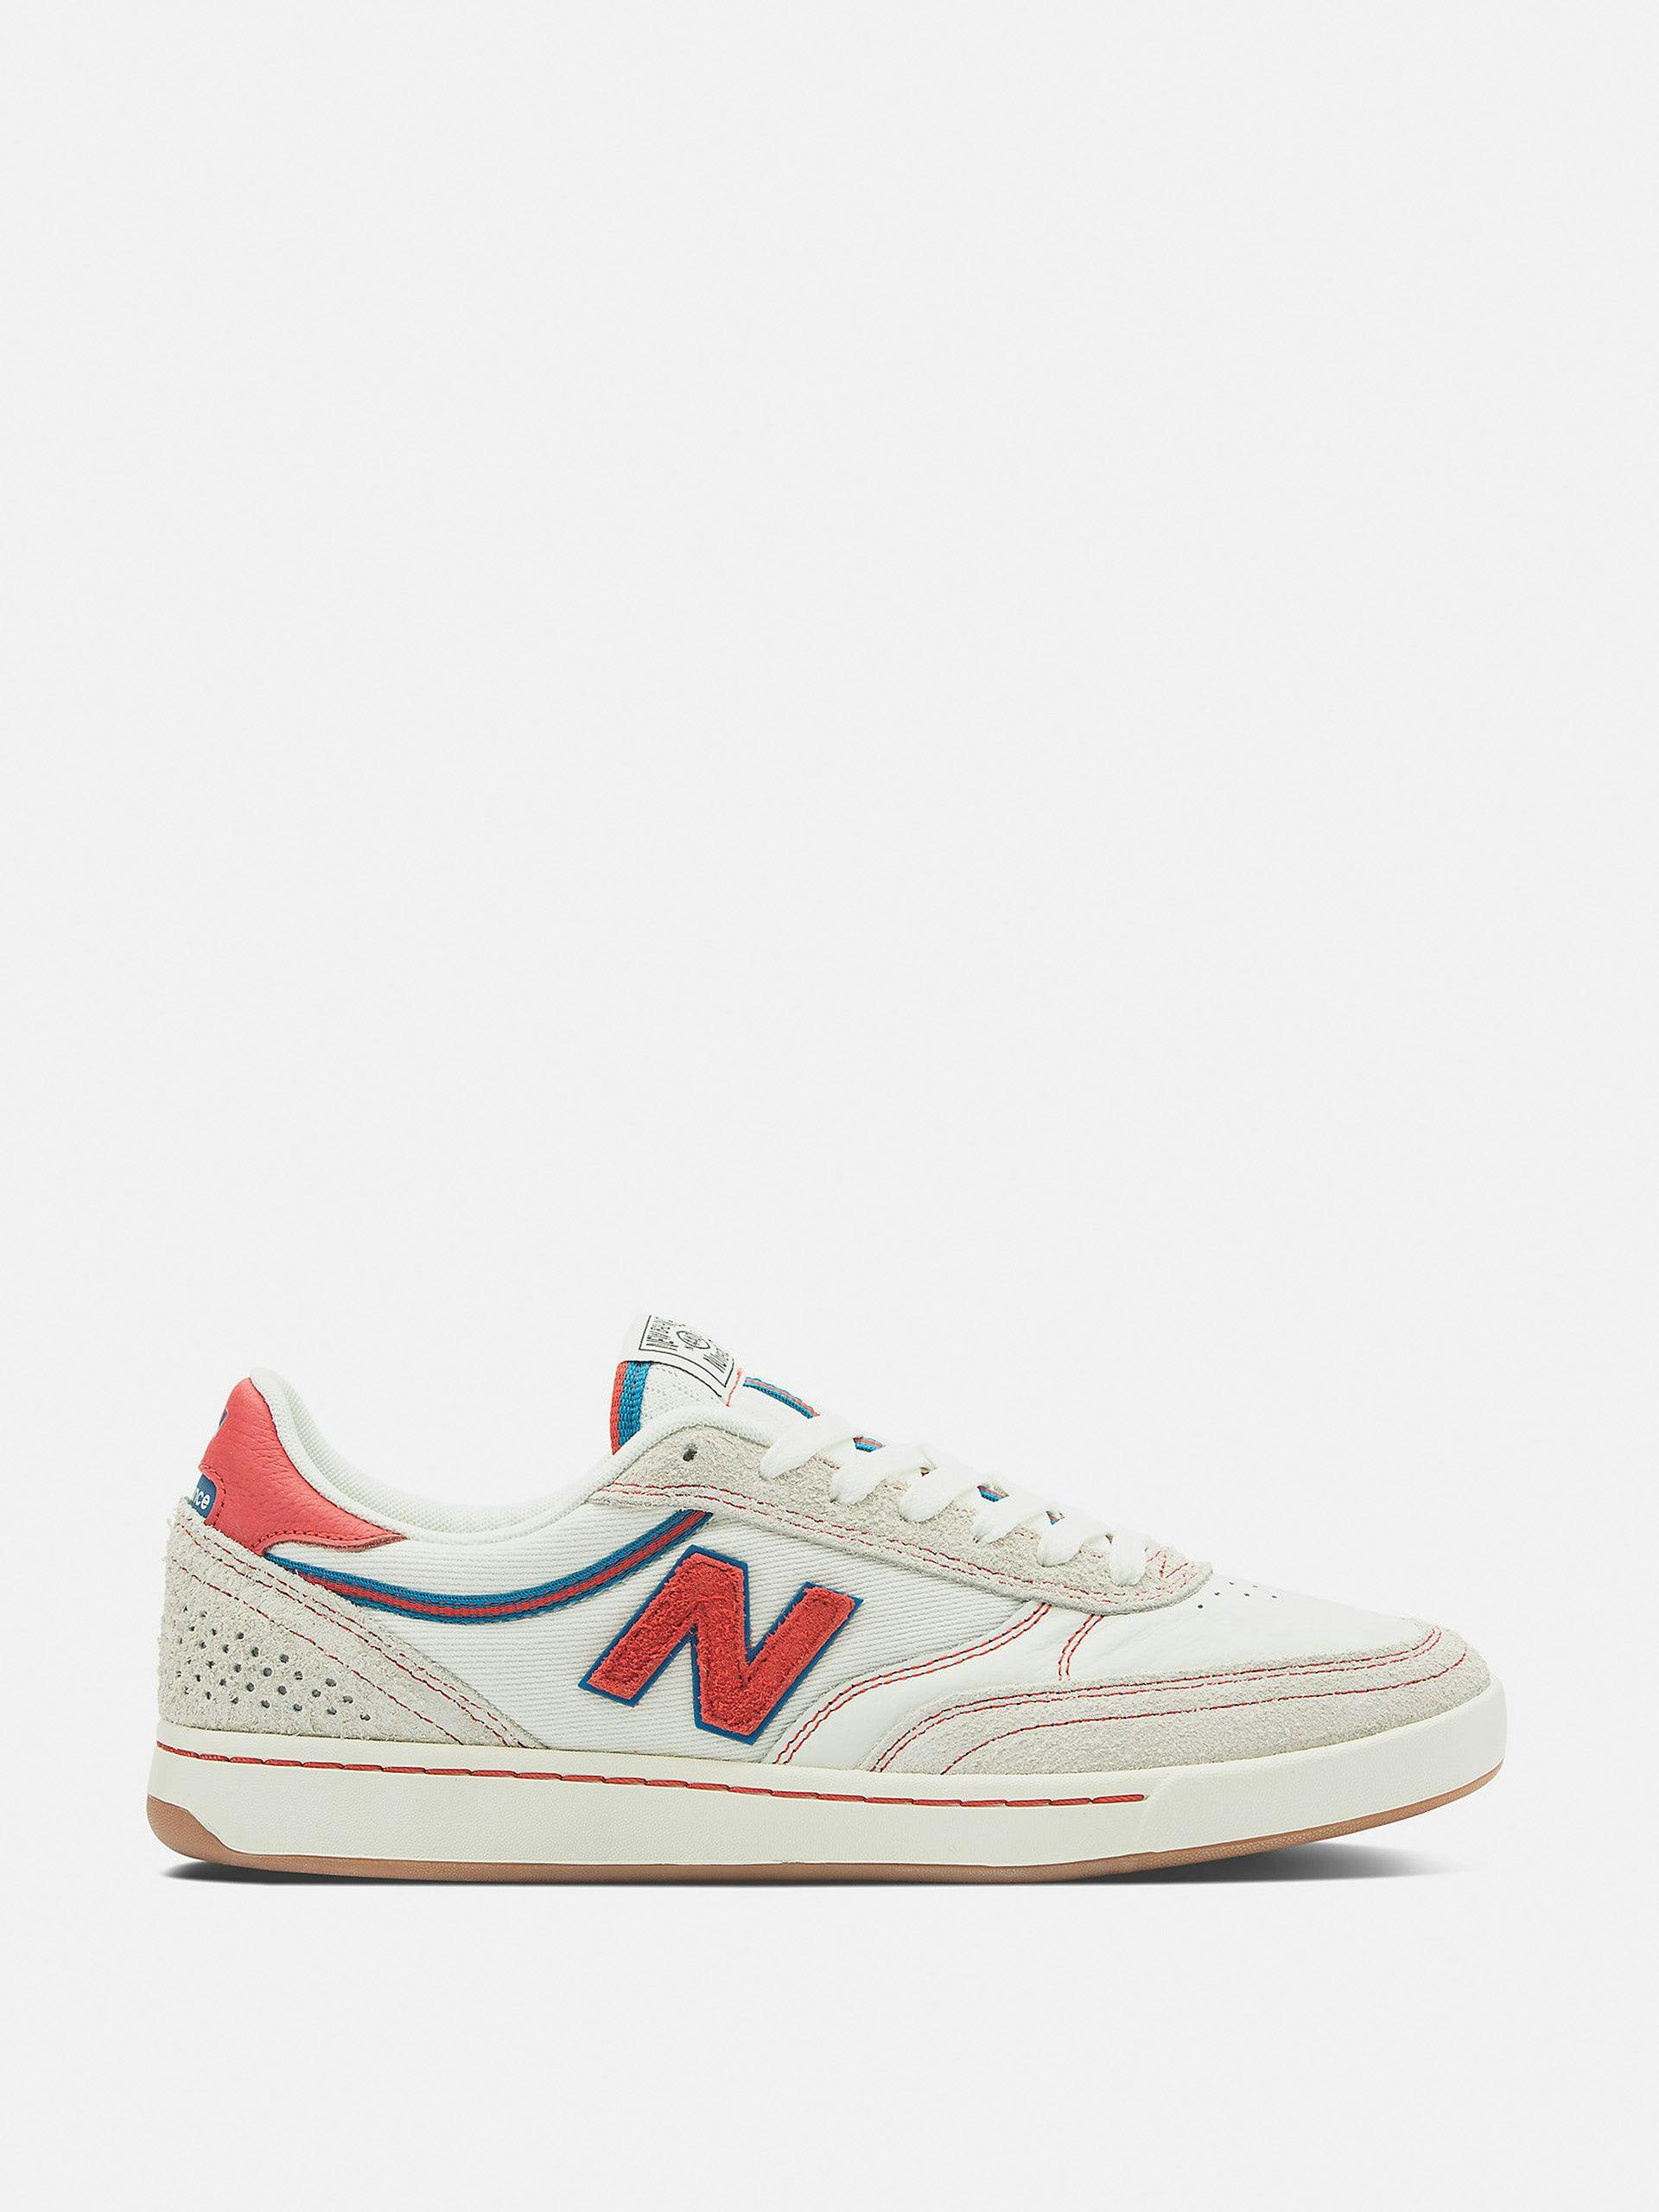 Sea salt with red NB Numeric 440 trainers